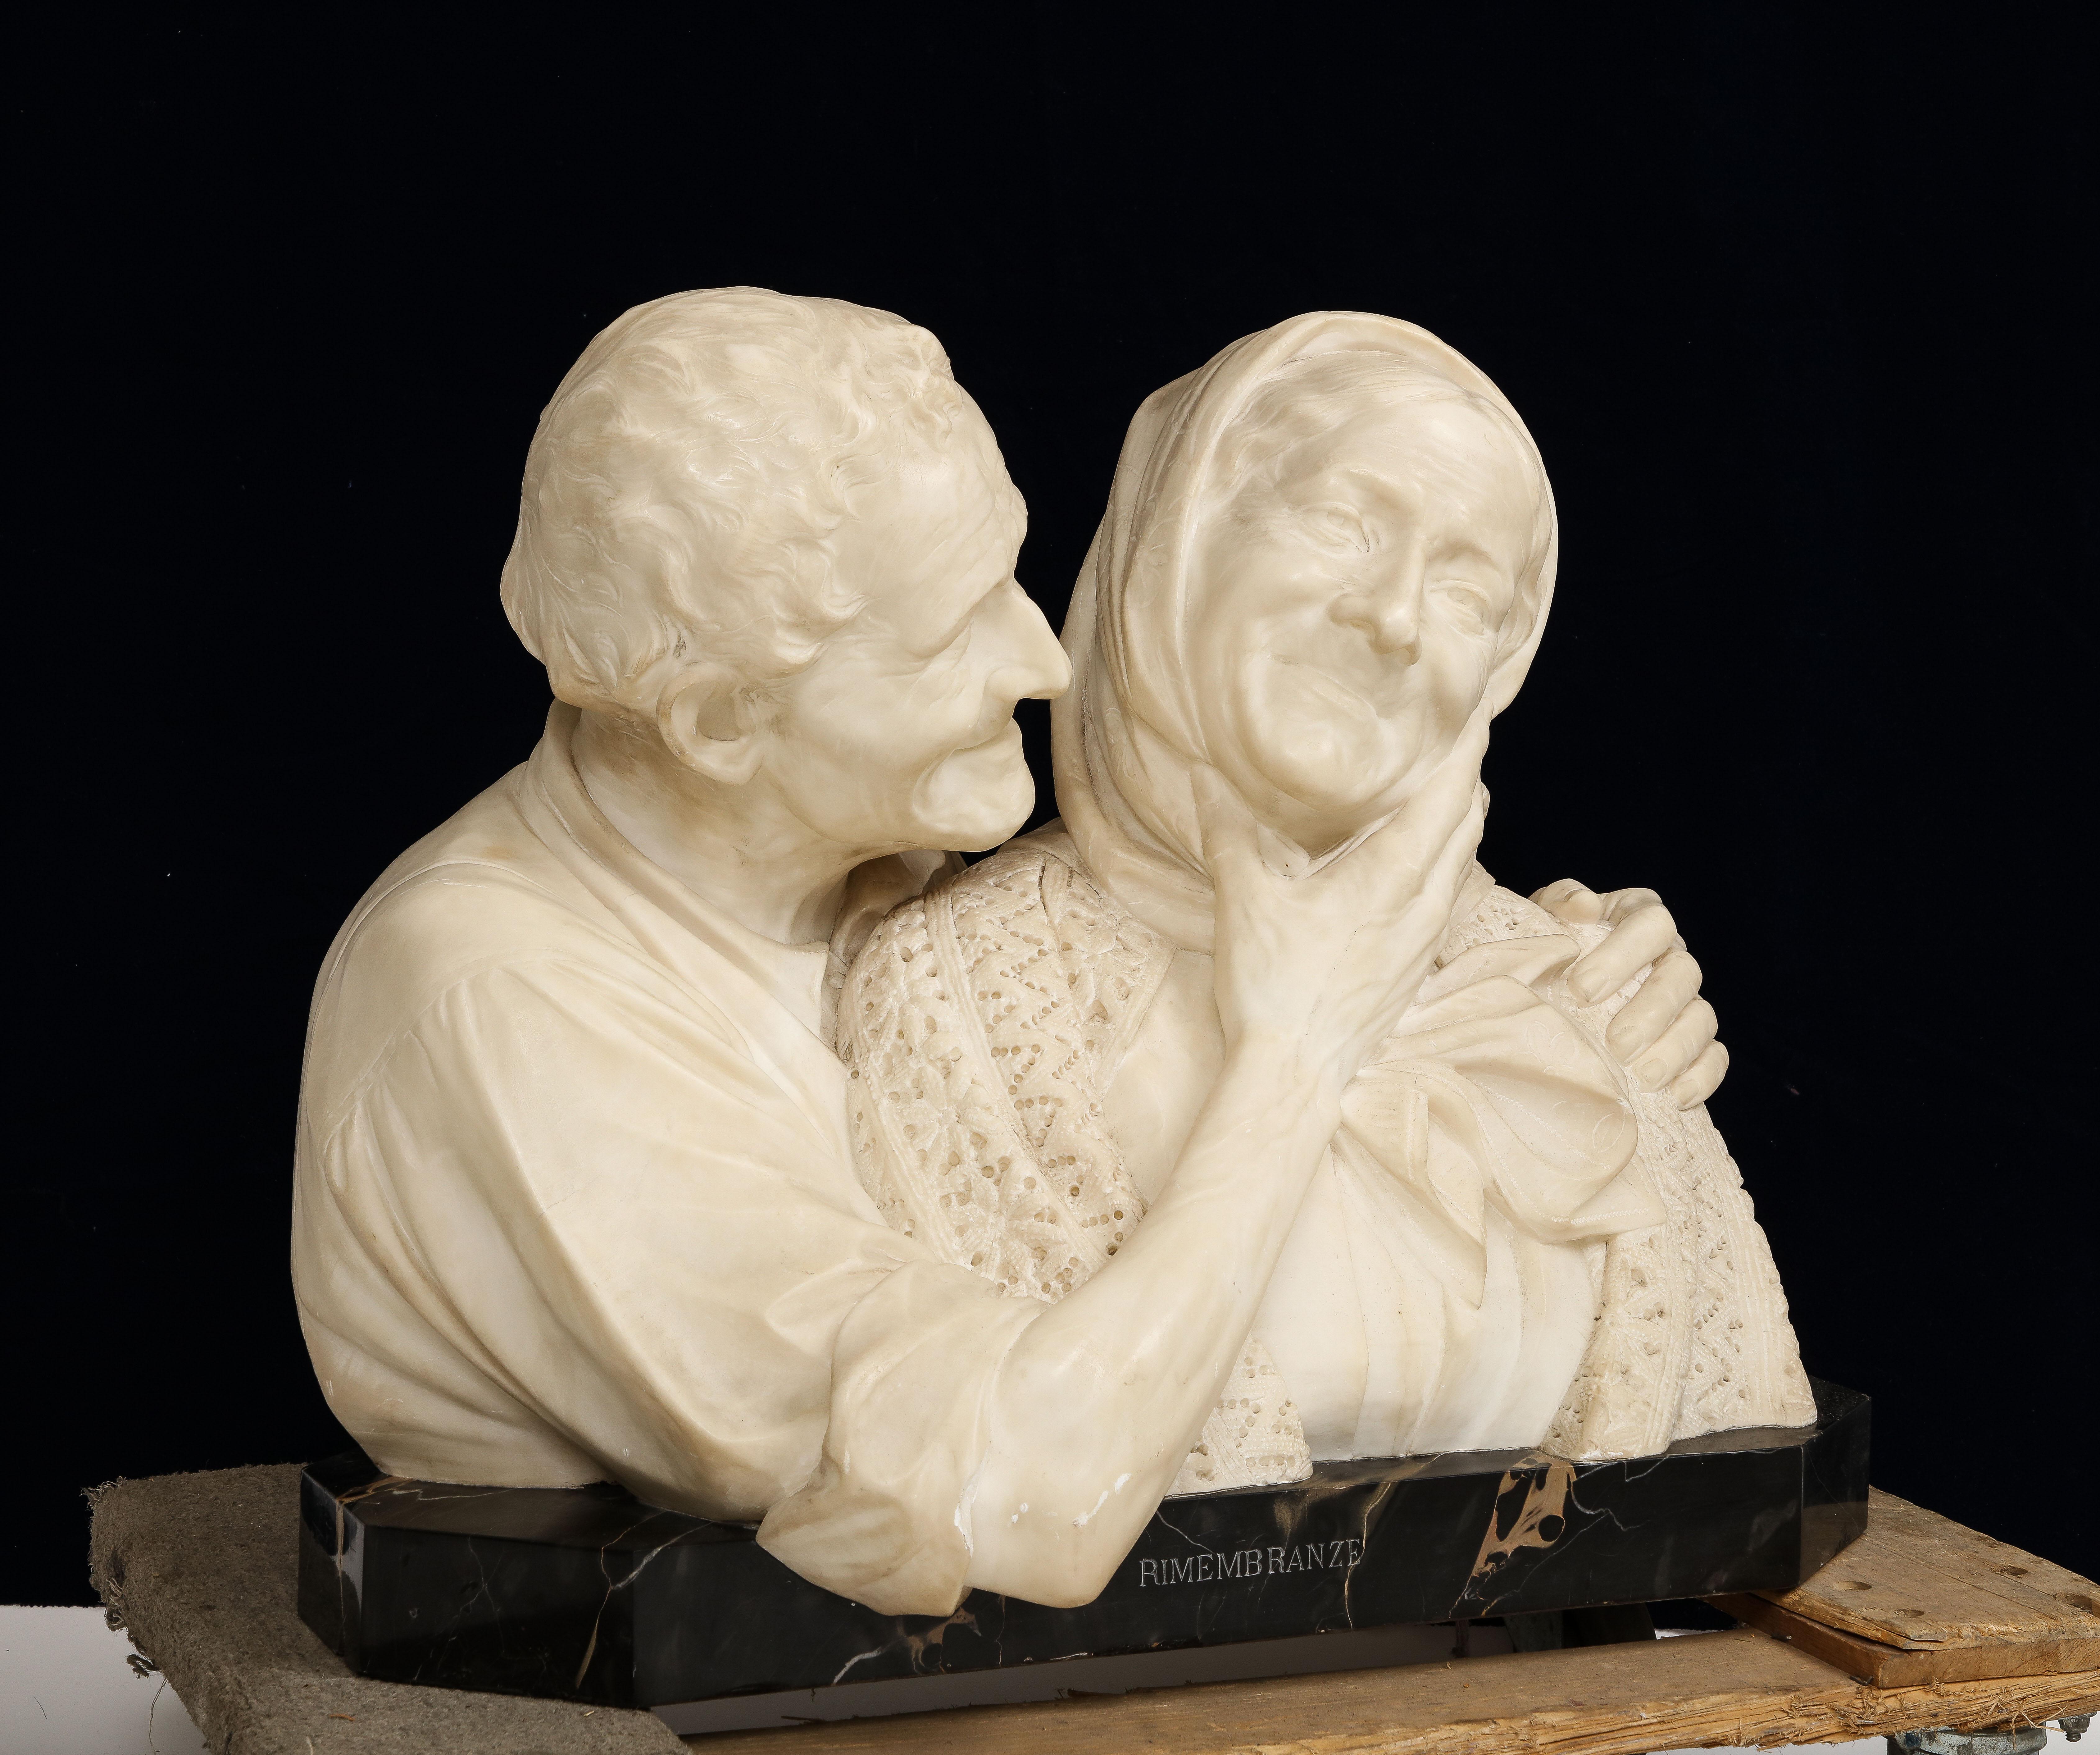 Louis XVI Italian Marble Bust of The Grandparents, Titled: Rimembranze, Signed Vichi For Sale